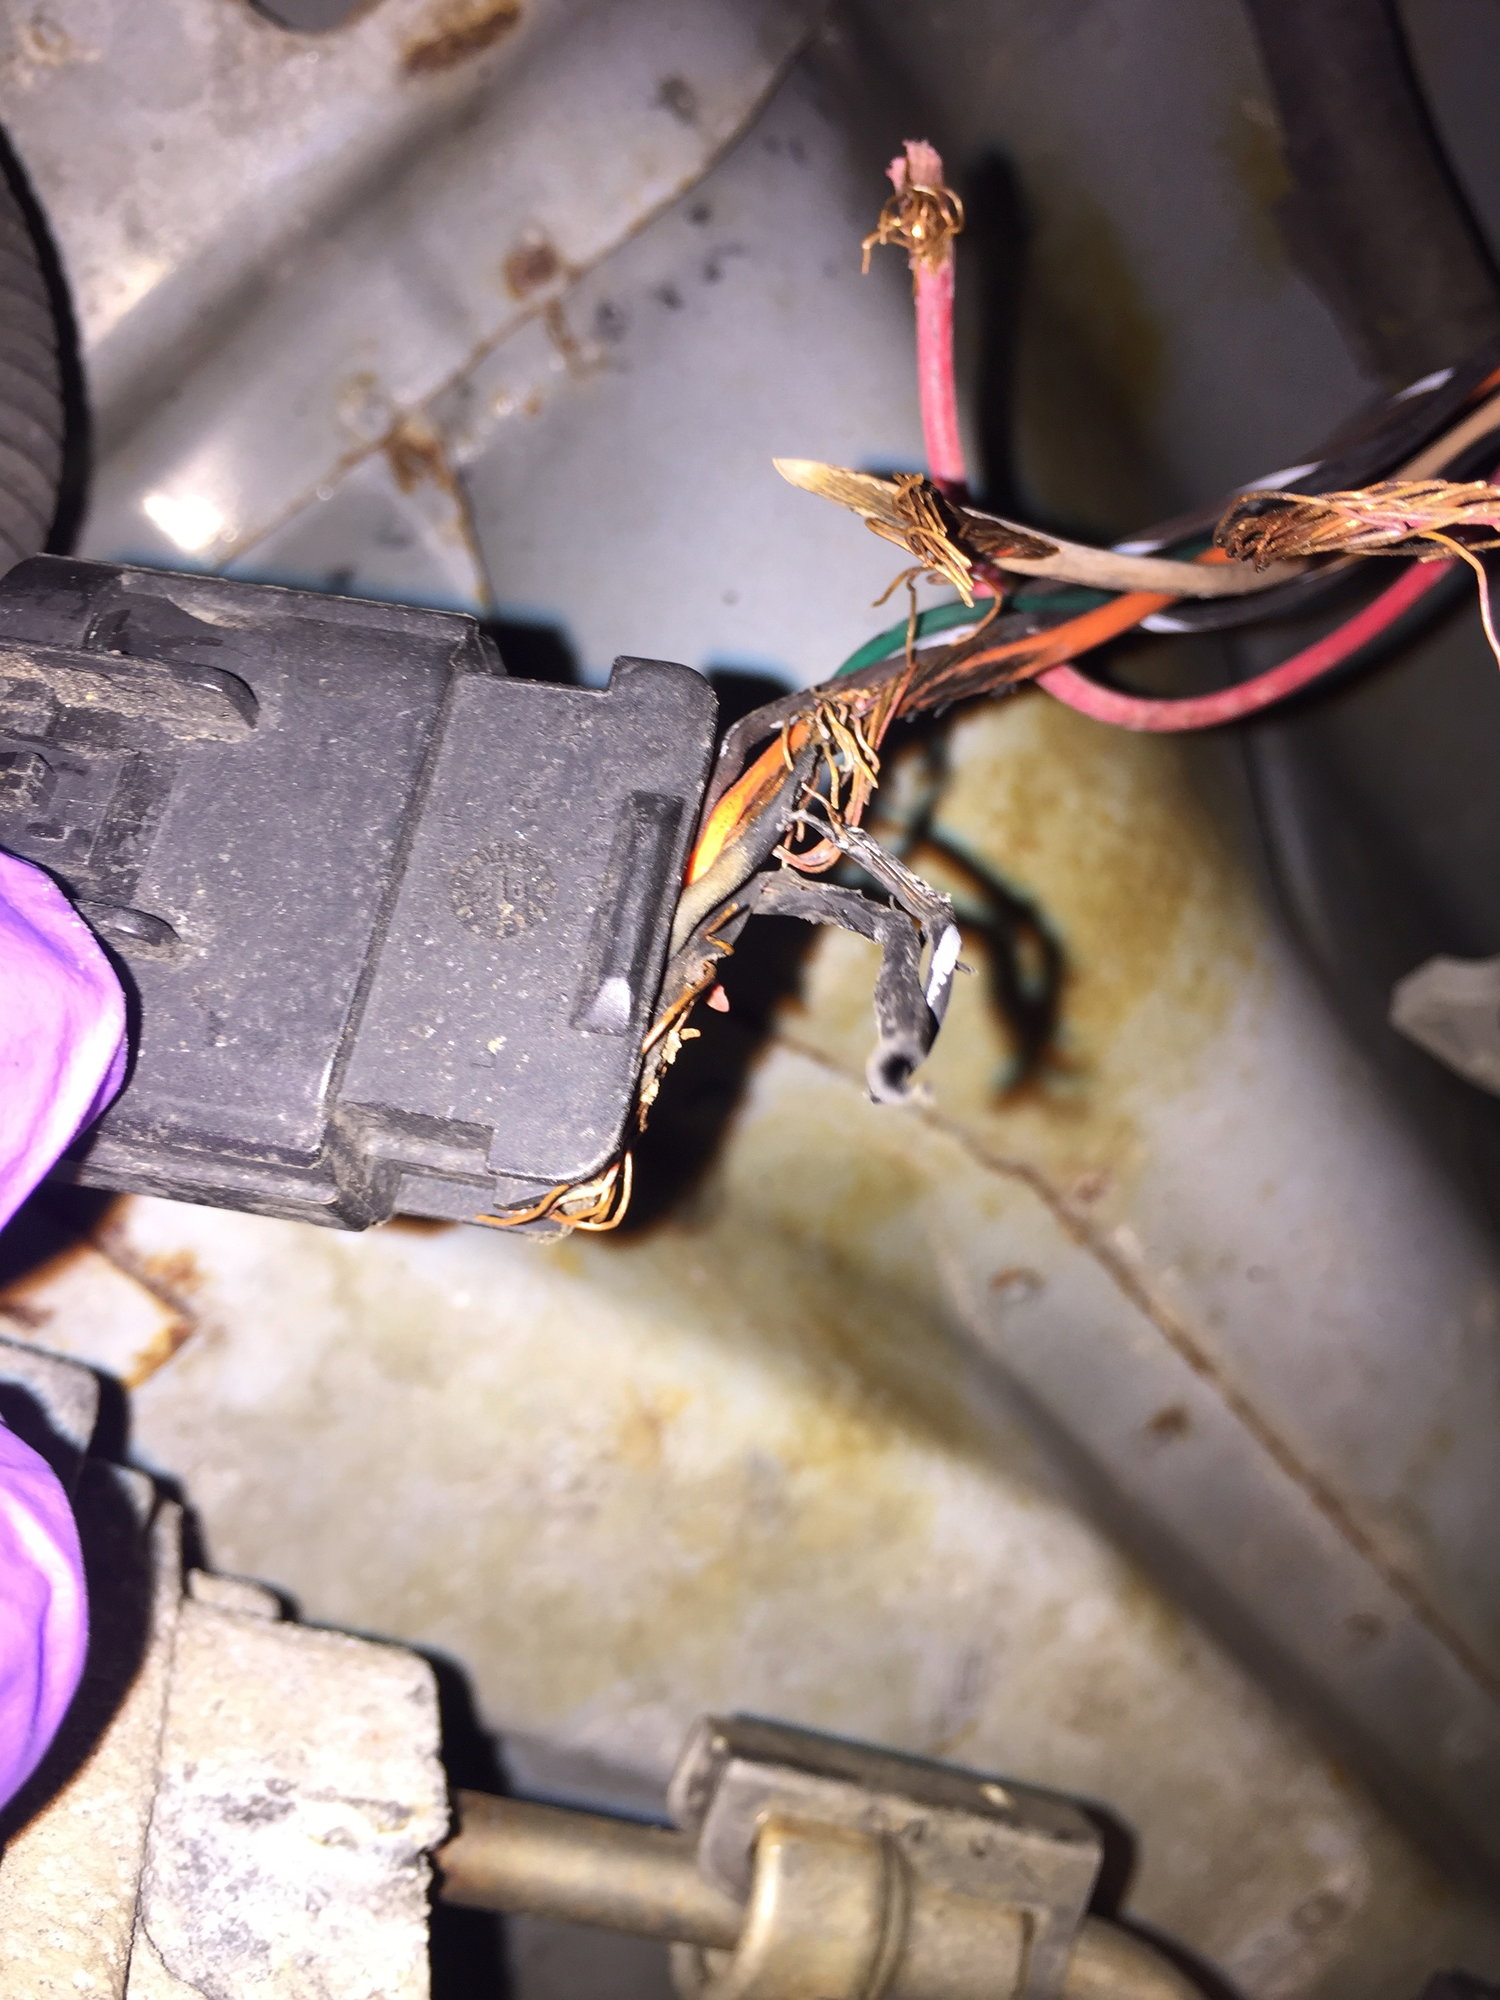 4WD wiring harness from Encoder Motor - Chevrolet Forum - Chevy